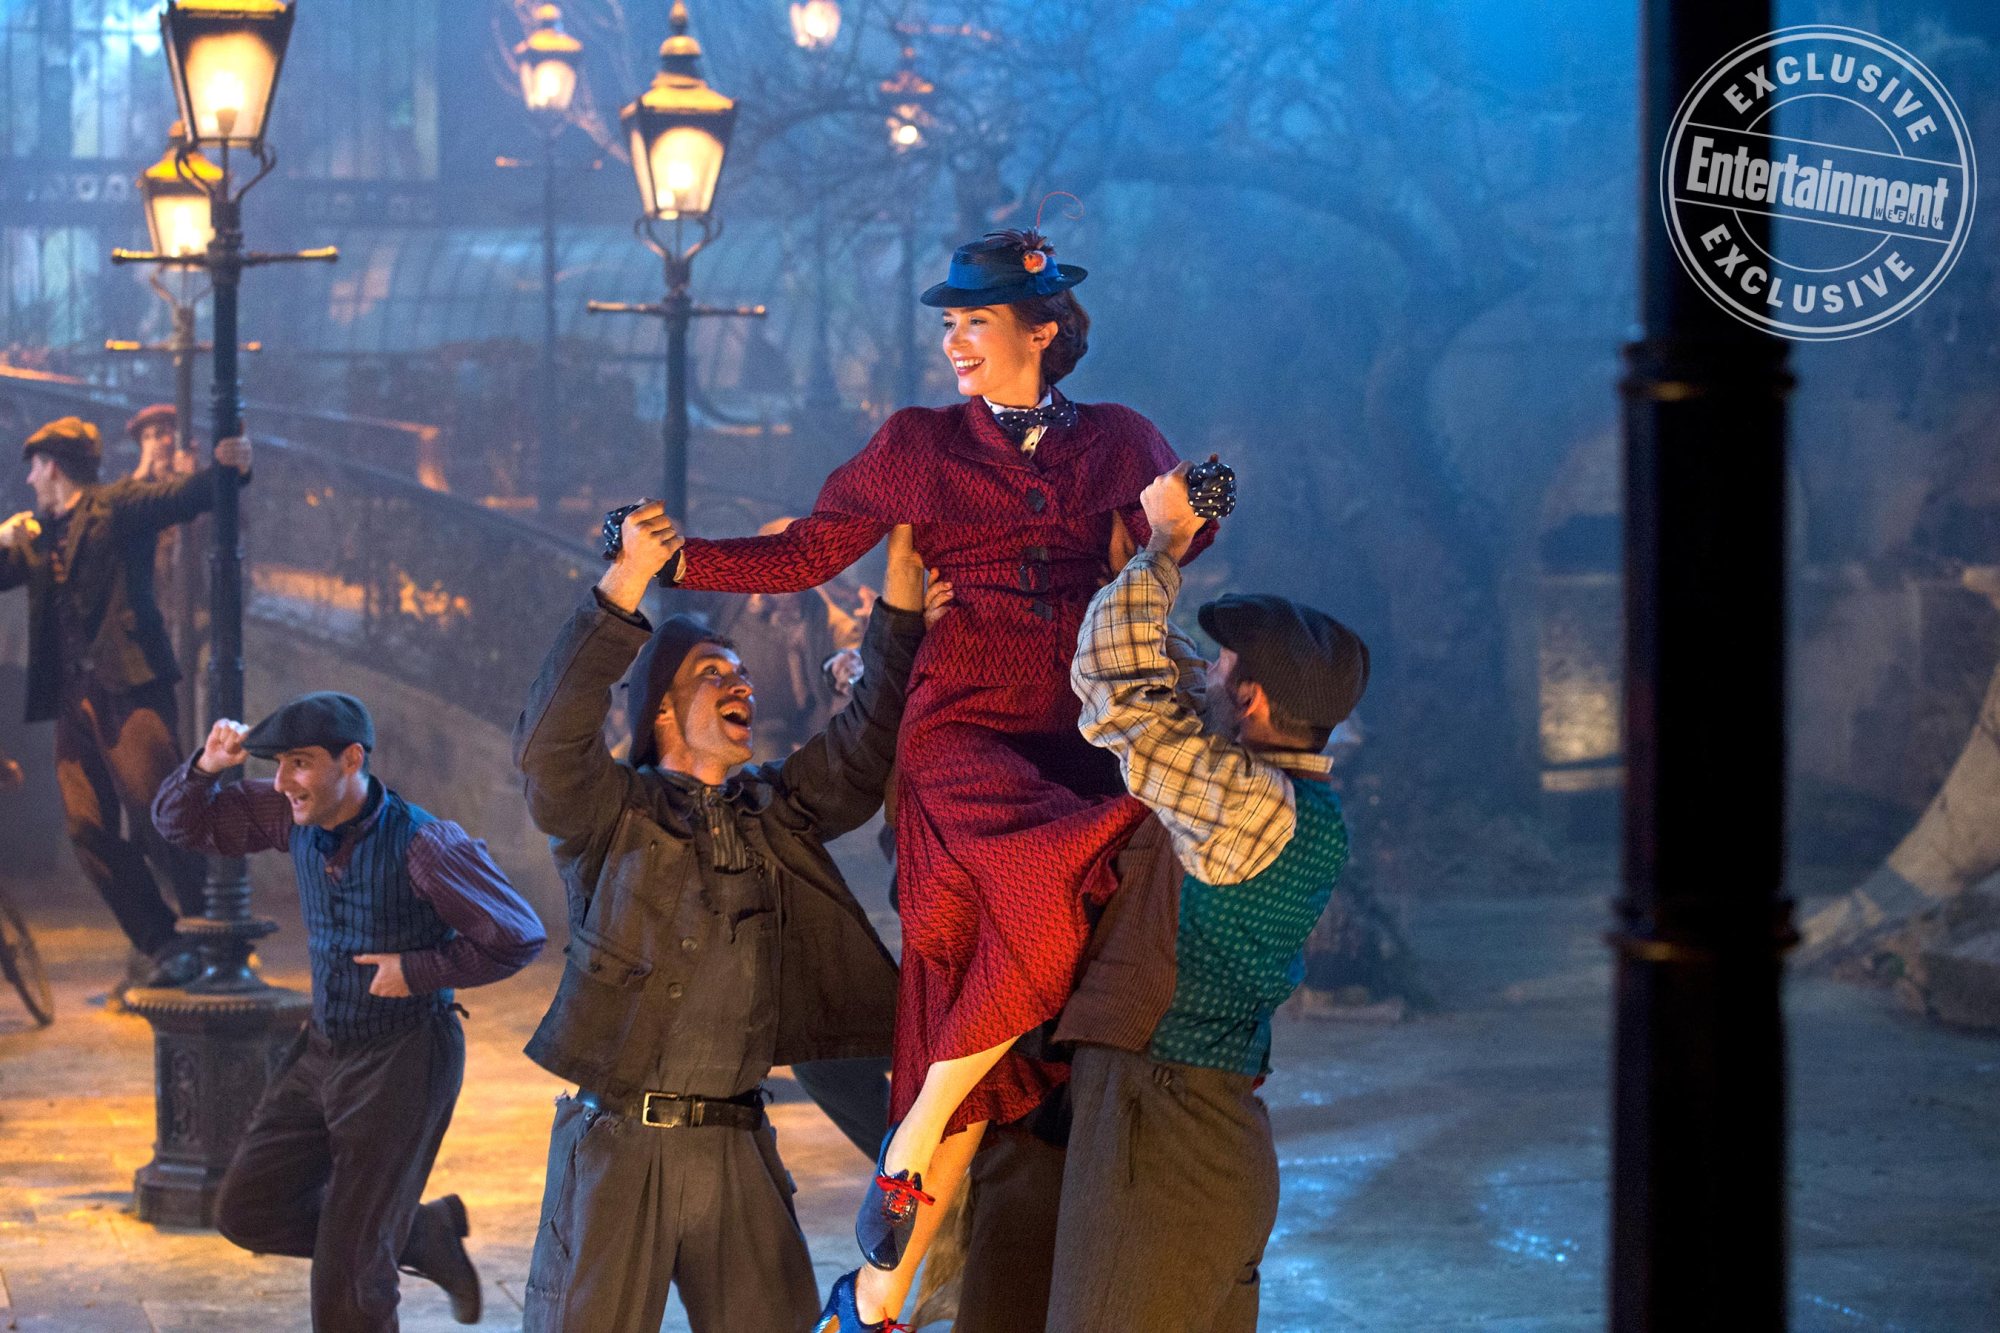 Emily Blunt is Mary Poppins in Dinsey’s original musica MARY. POPPINS RETURNS, a sequel to the 1964 MARY POPPINS which takes audiences on an entirely new adventure with the practically perfect nanny and the Banks family.